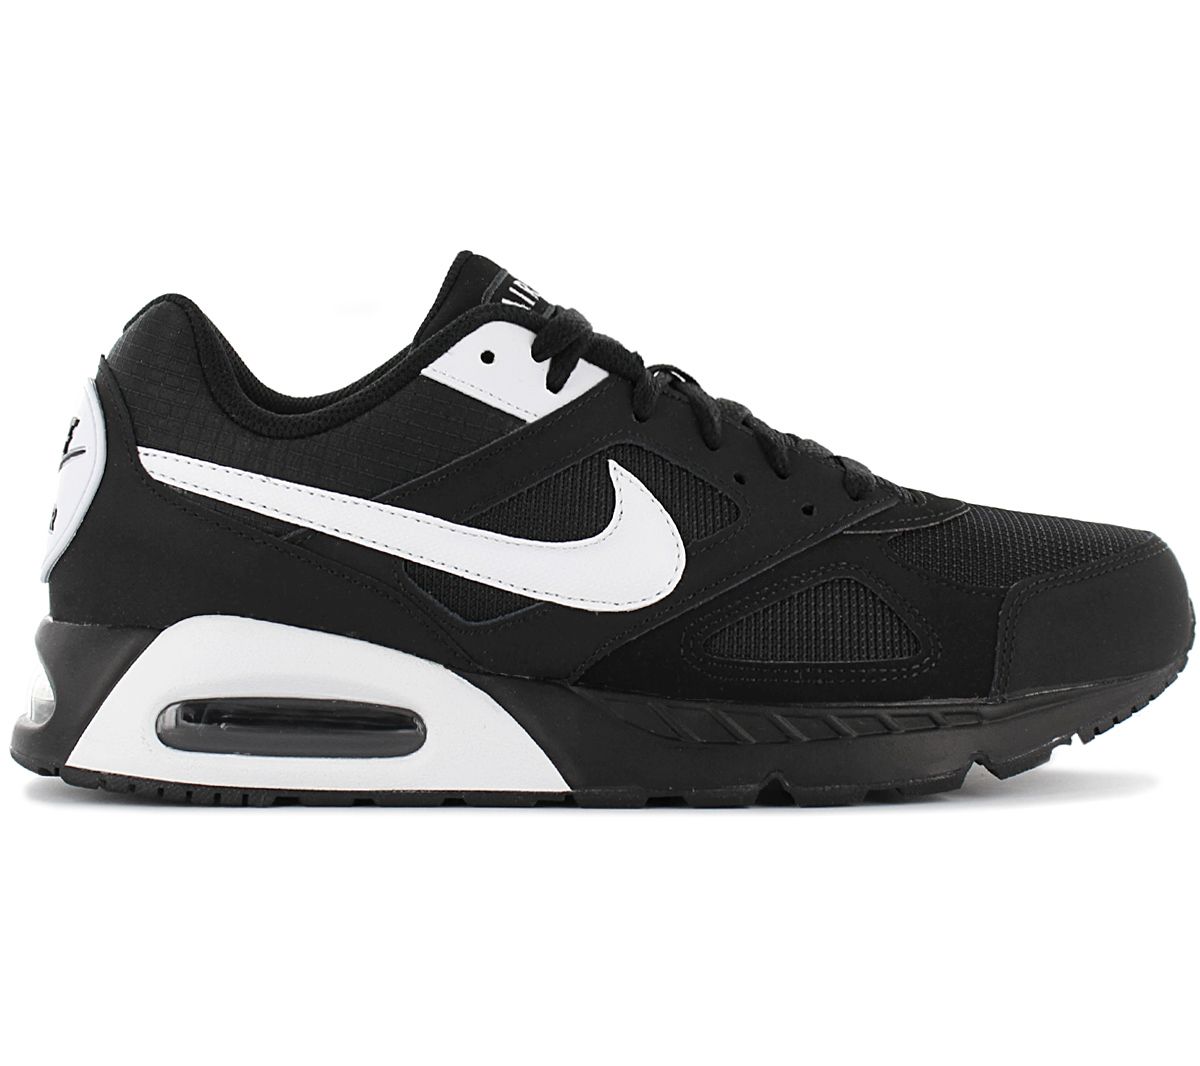 NEW Nike Air Max IVO 580518-011 Men´s Shoes Trainers Sneakers SALE | eBay